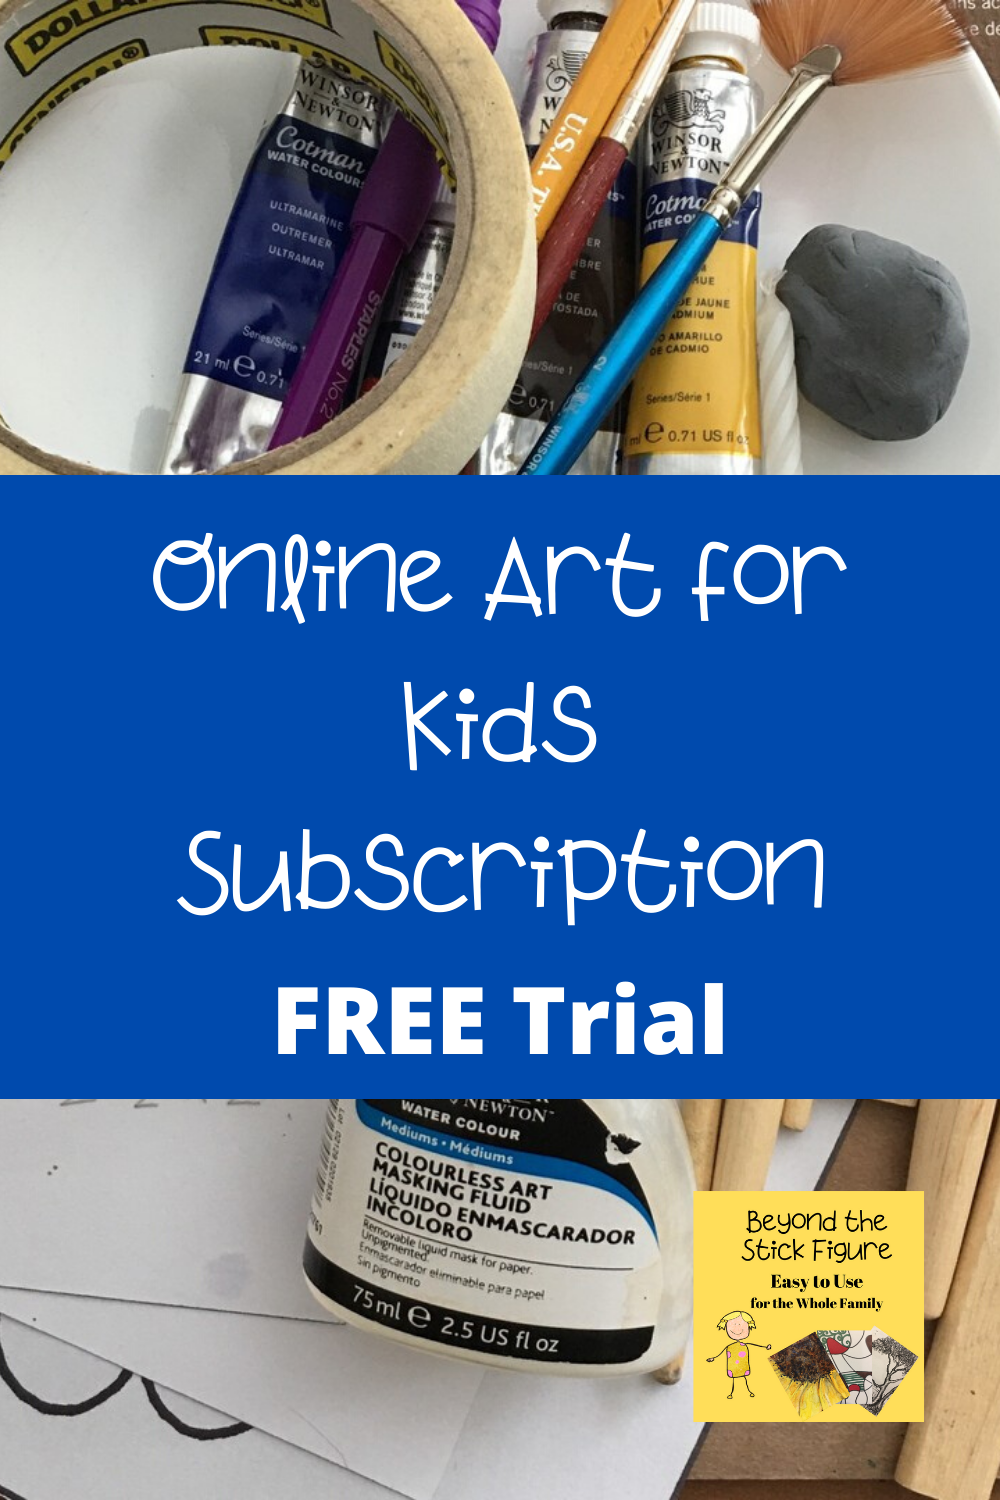 Do your children love art? Do you wish you knew how to paint and draw so you could be creative with them? Introducing the Online Art for Kids Subscription built for the whole family. Spend quality time together, create amazing masterpieces, and build confidence in your creative skills.